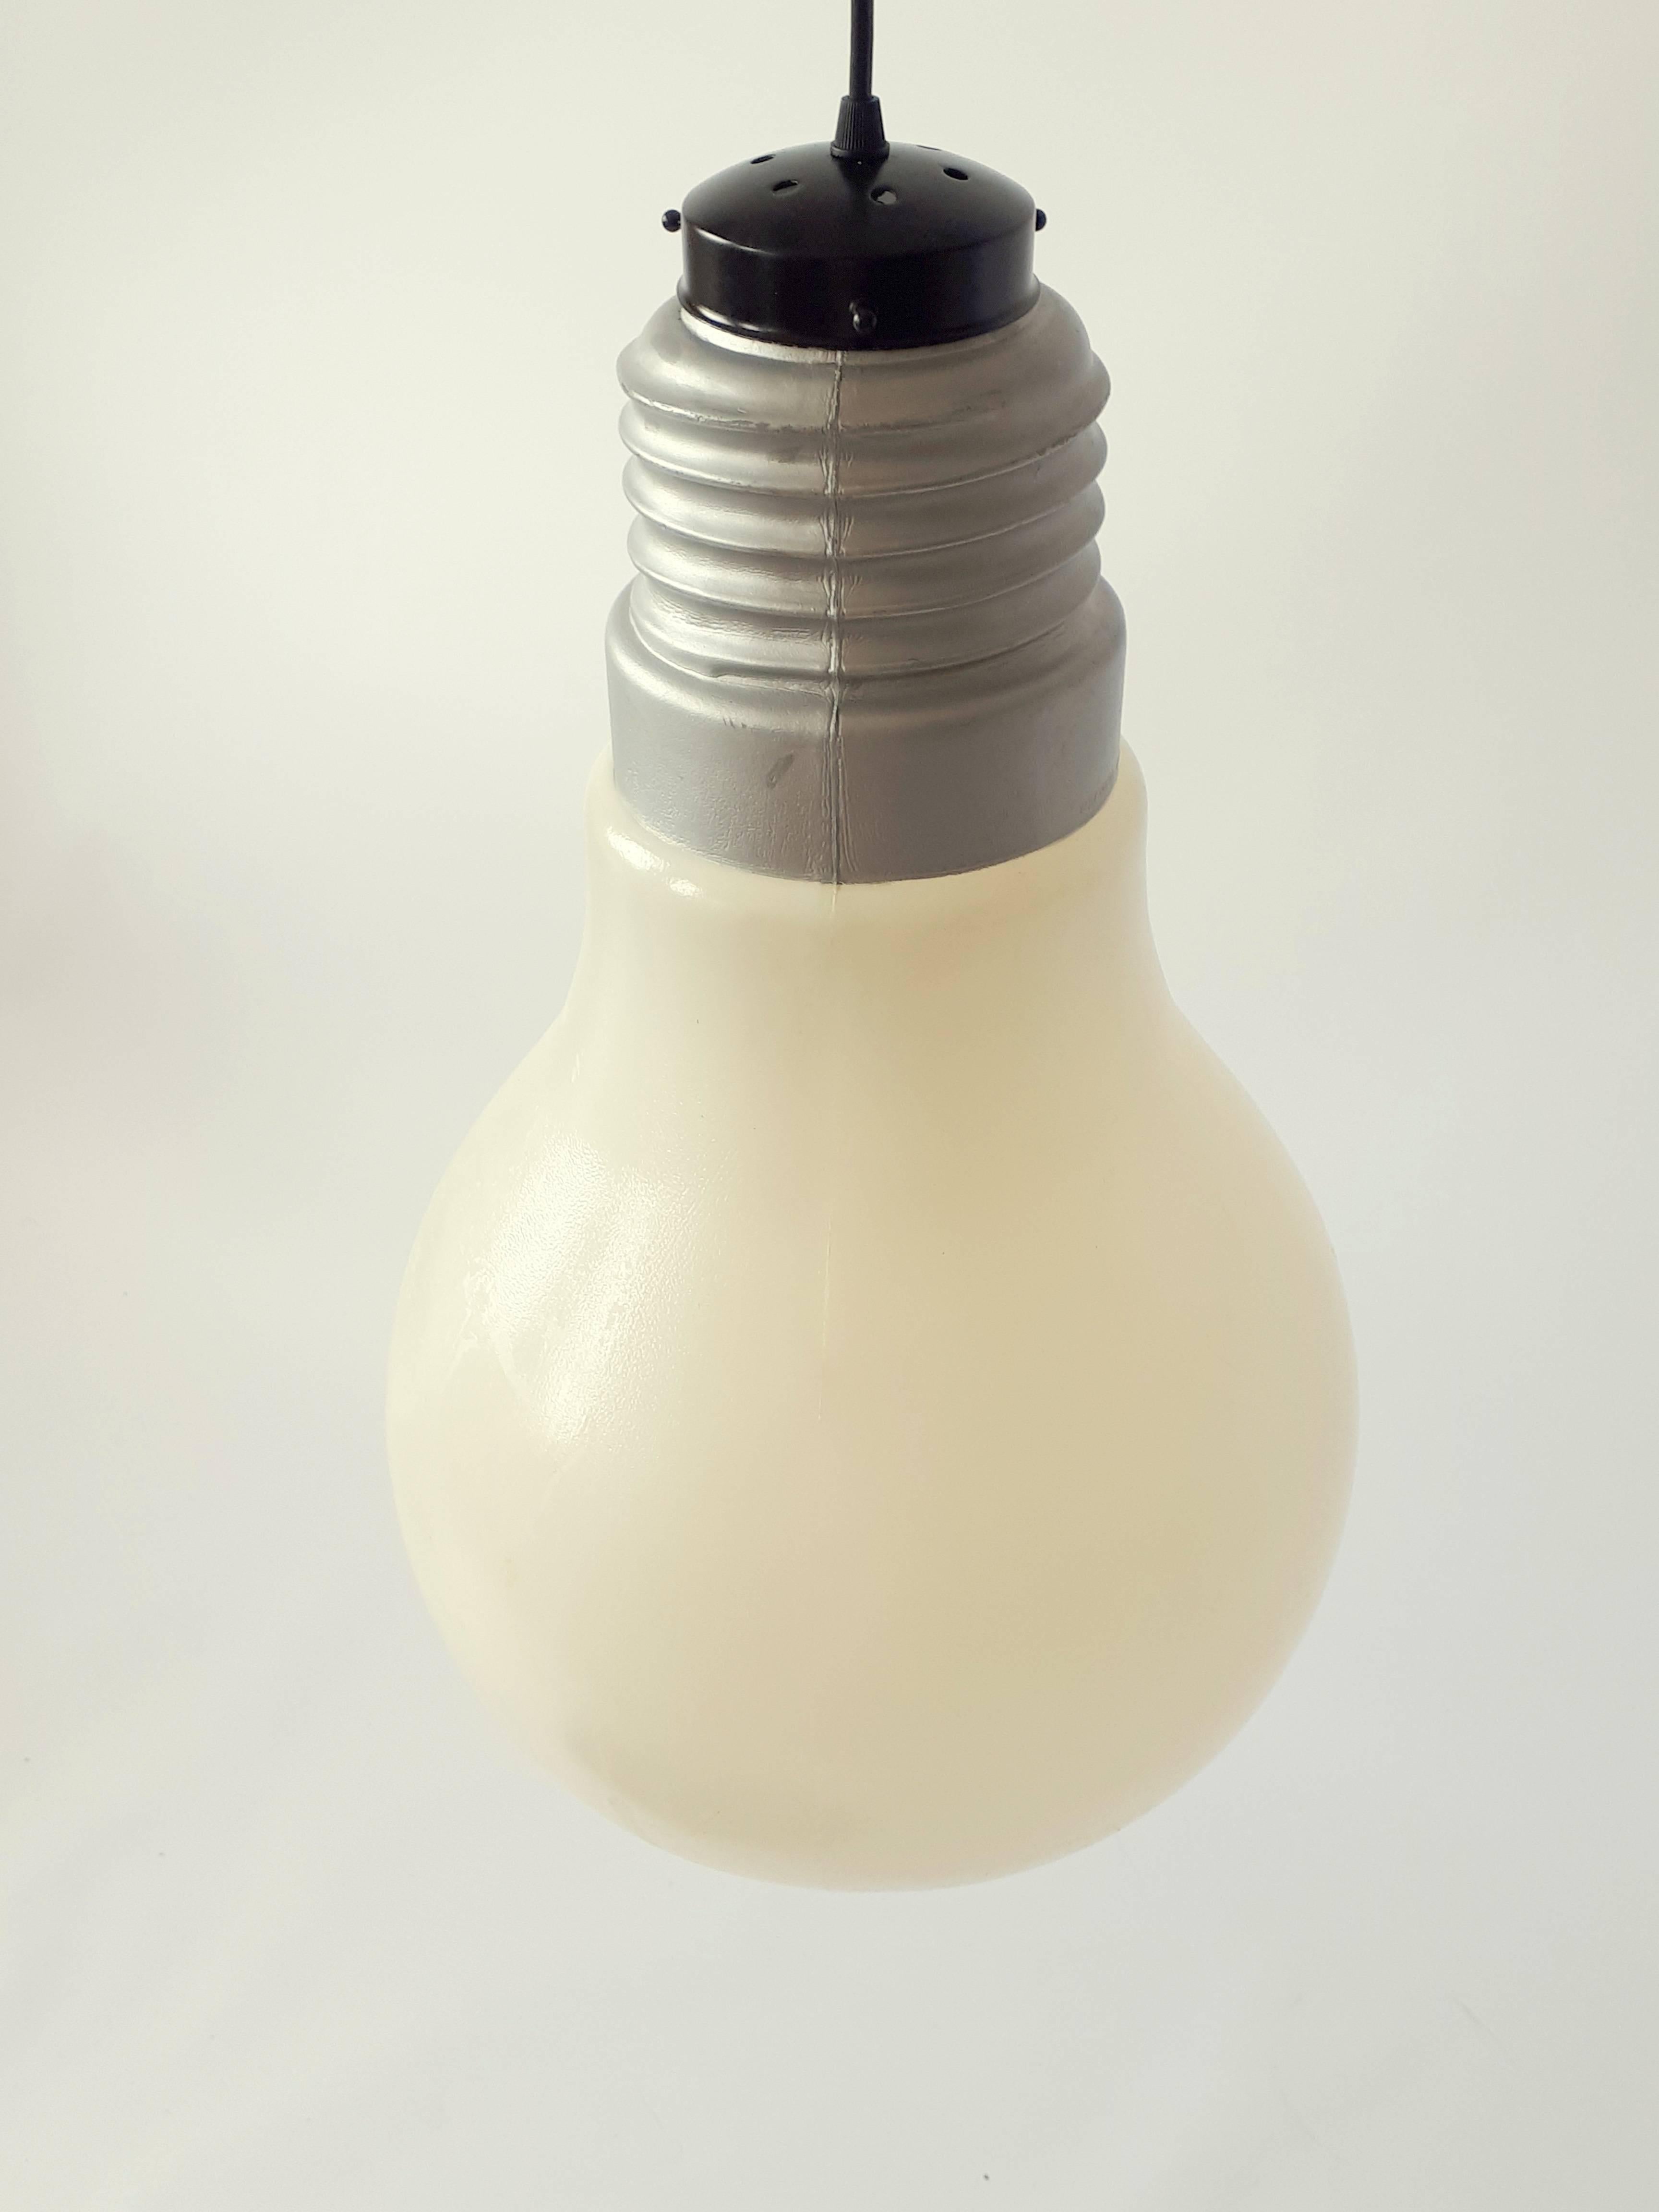 light bulb hanging from ceiling